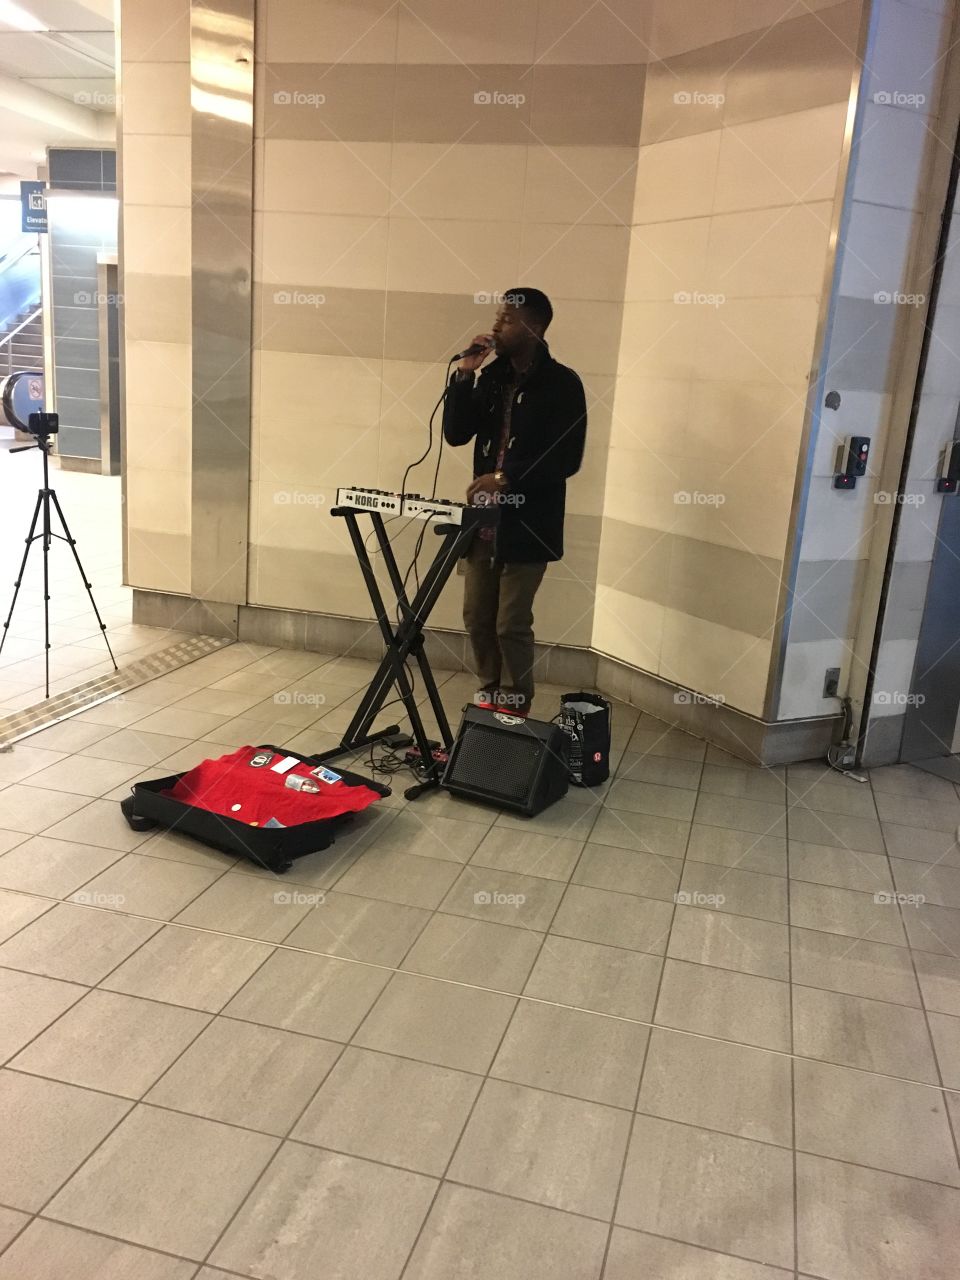 Musician in the subway station 